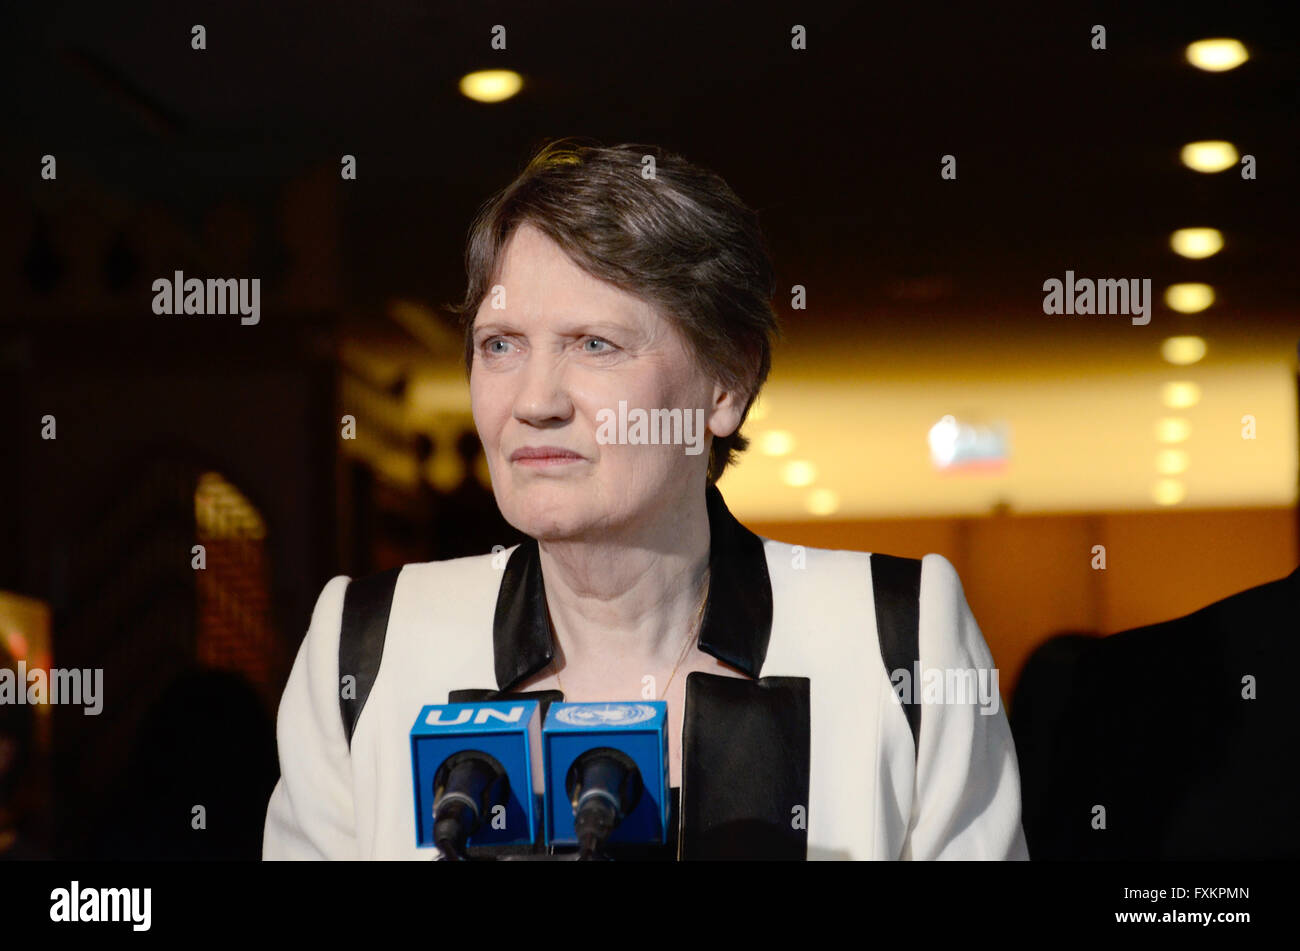 Helen Clark, former prime minister of New Zealand and current head of the UN Development Programme, addresses the press to discuss her candidacy for UN secretary general after a hearing before UN member states in New York on April 14, 2016. Photo: Emoke Bebiak/dpa Stock Photo